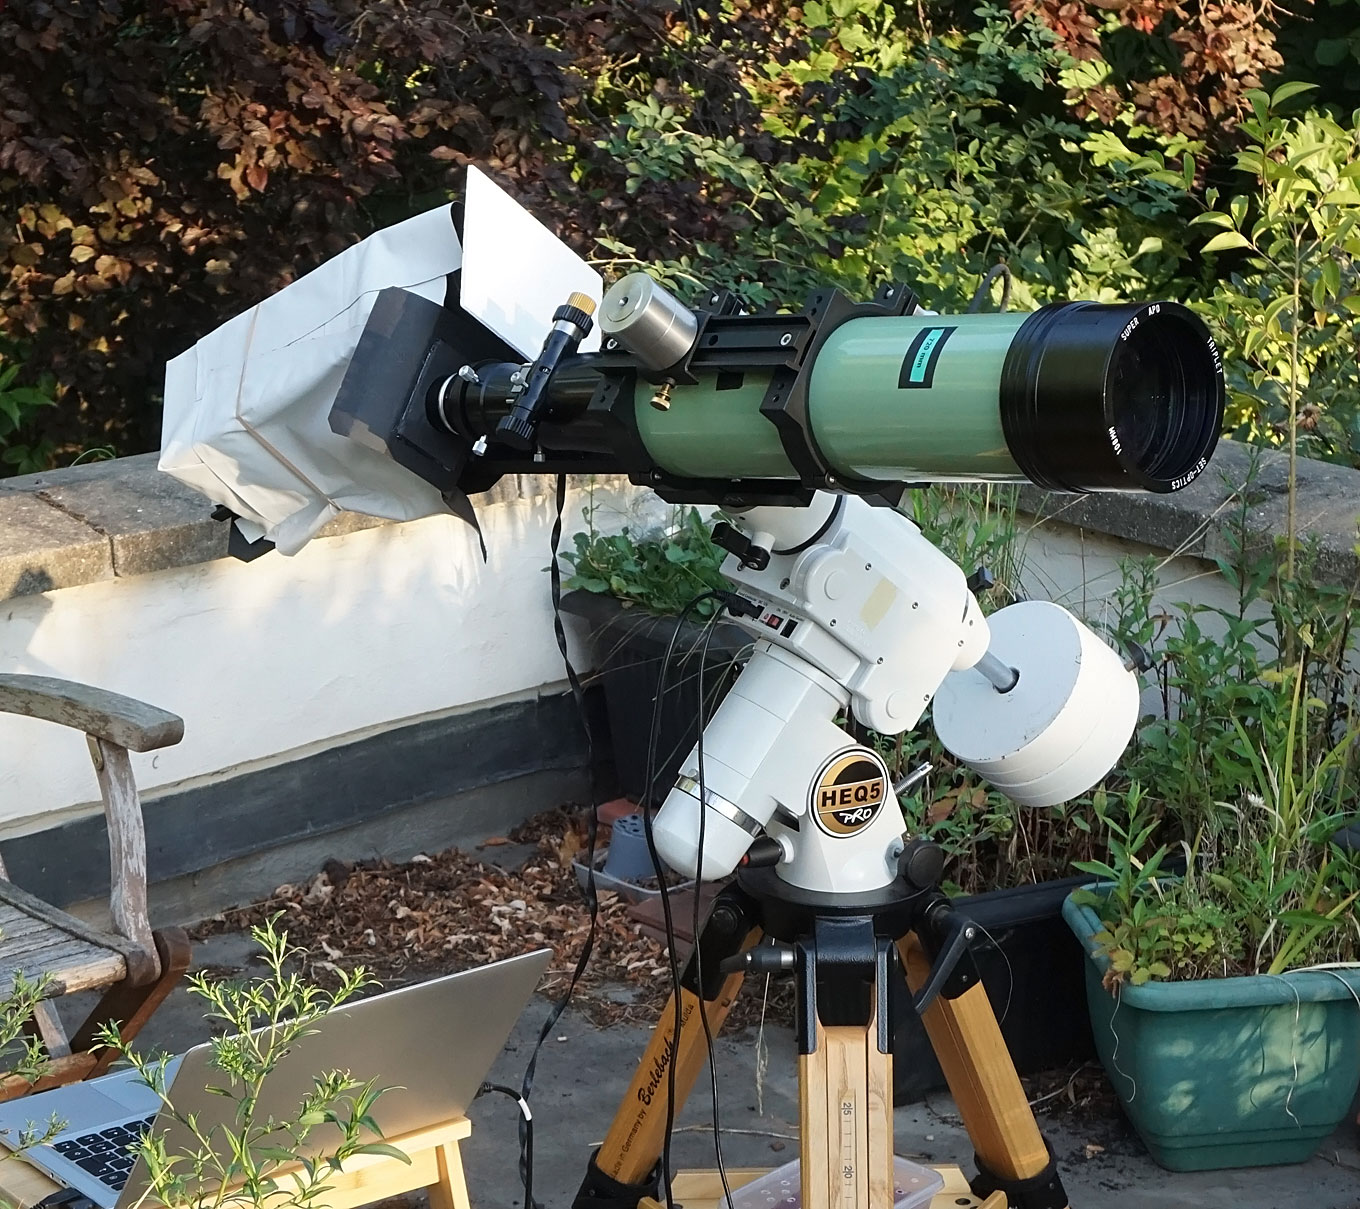 SHG setup. APO triplet refractor, HEQ5 Pro mount. Note the telescope is pointed at the eastern horizon to get the early morning light. This photo was taken just before the Sun rose over the trees.